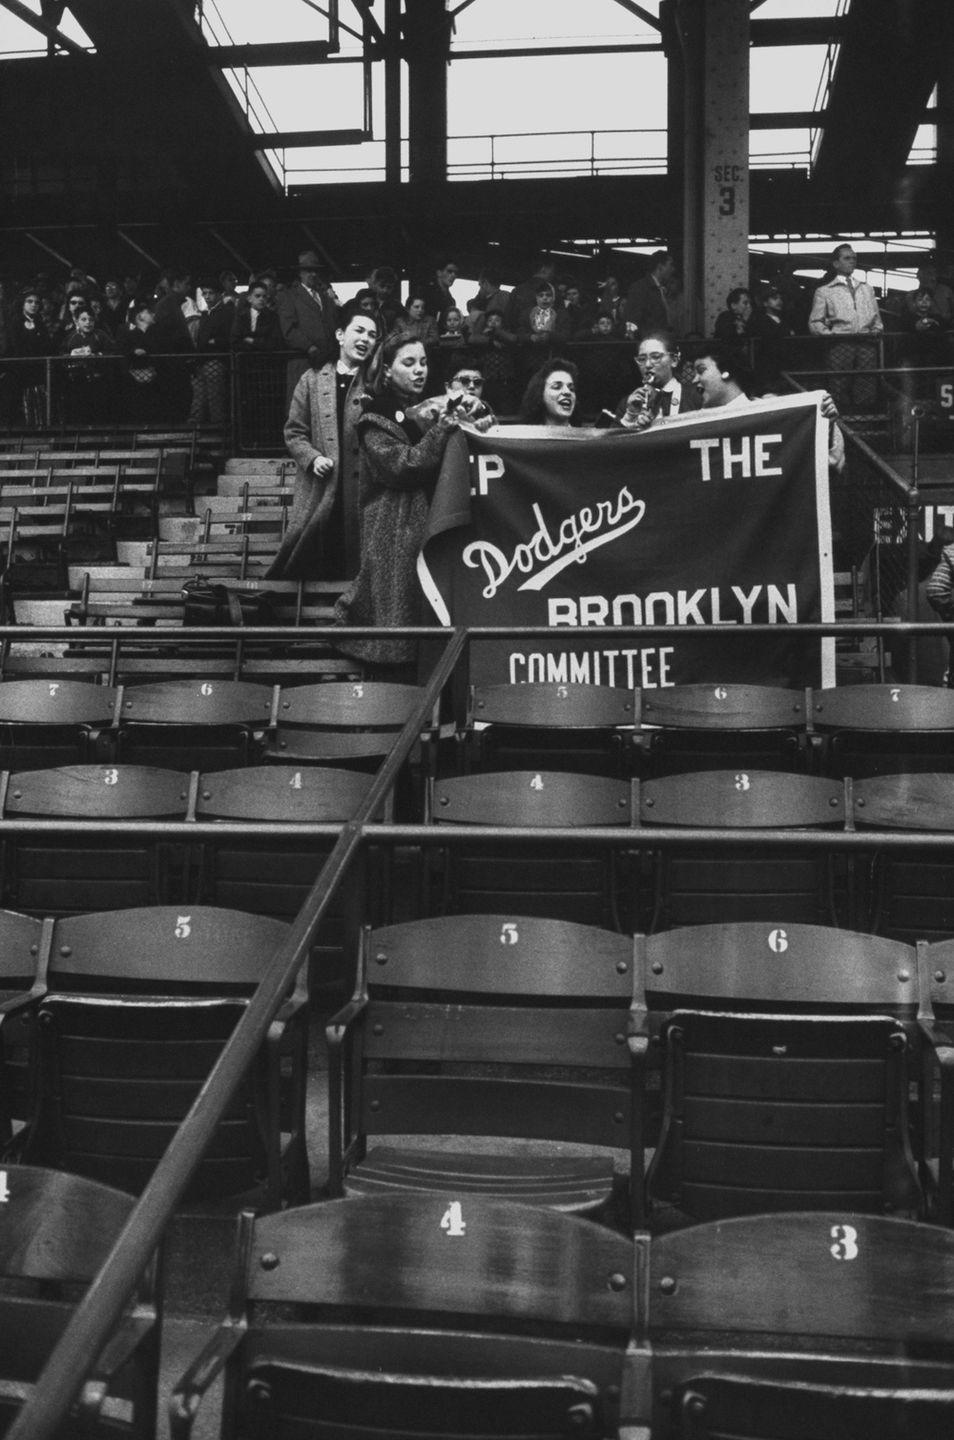 1957: A Loss for New York